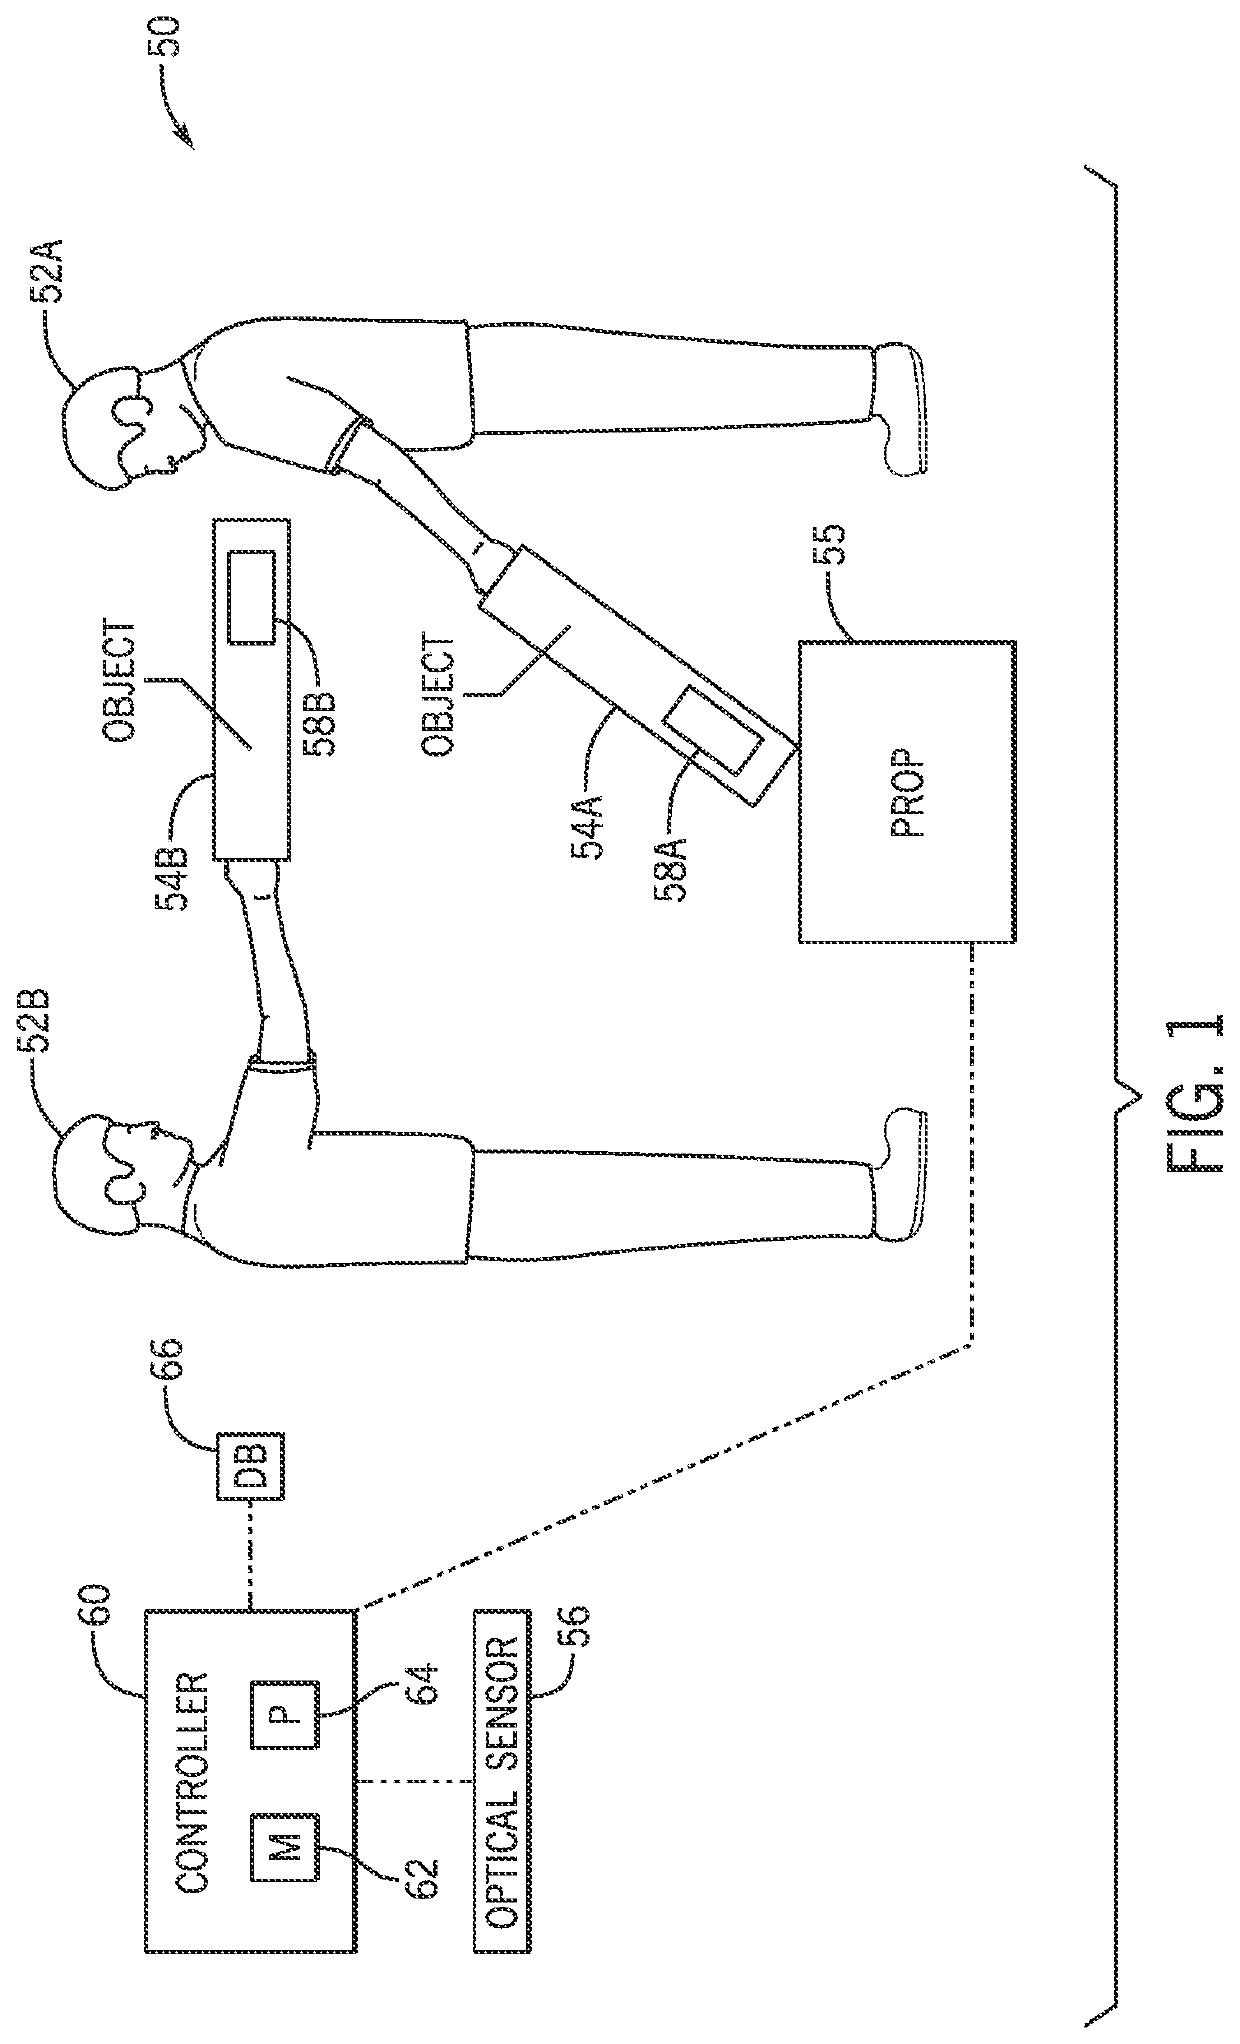 Interactive attraction system and method for object and user association